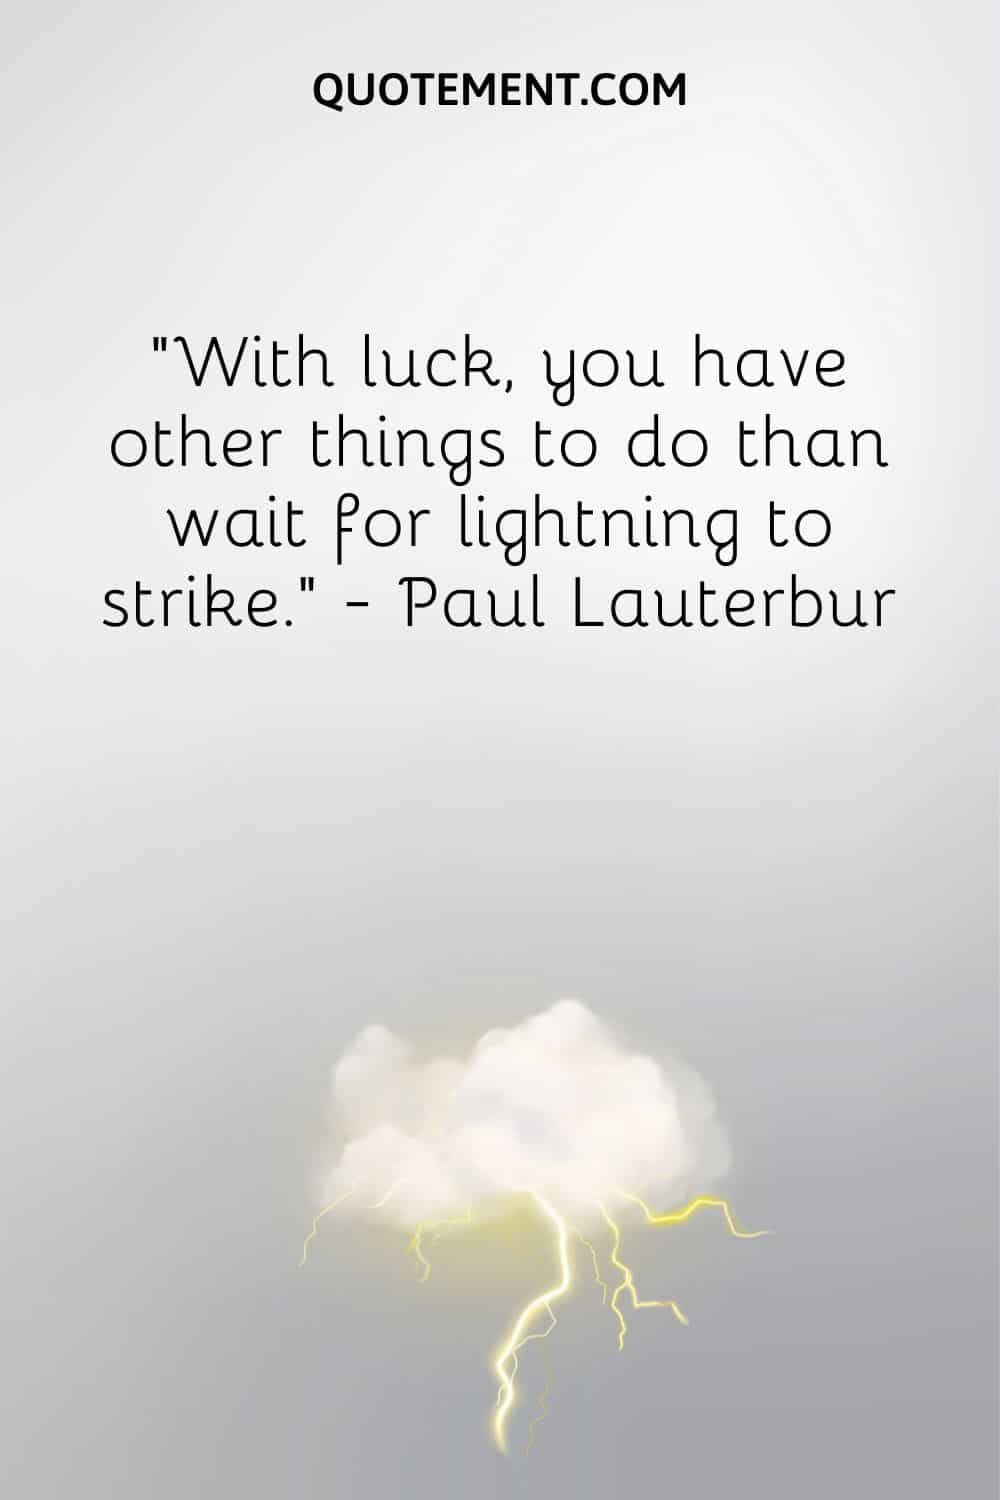 With luck, you have other things to do than wait for lightning to strike